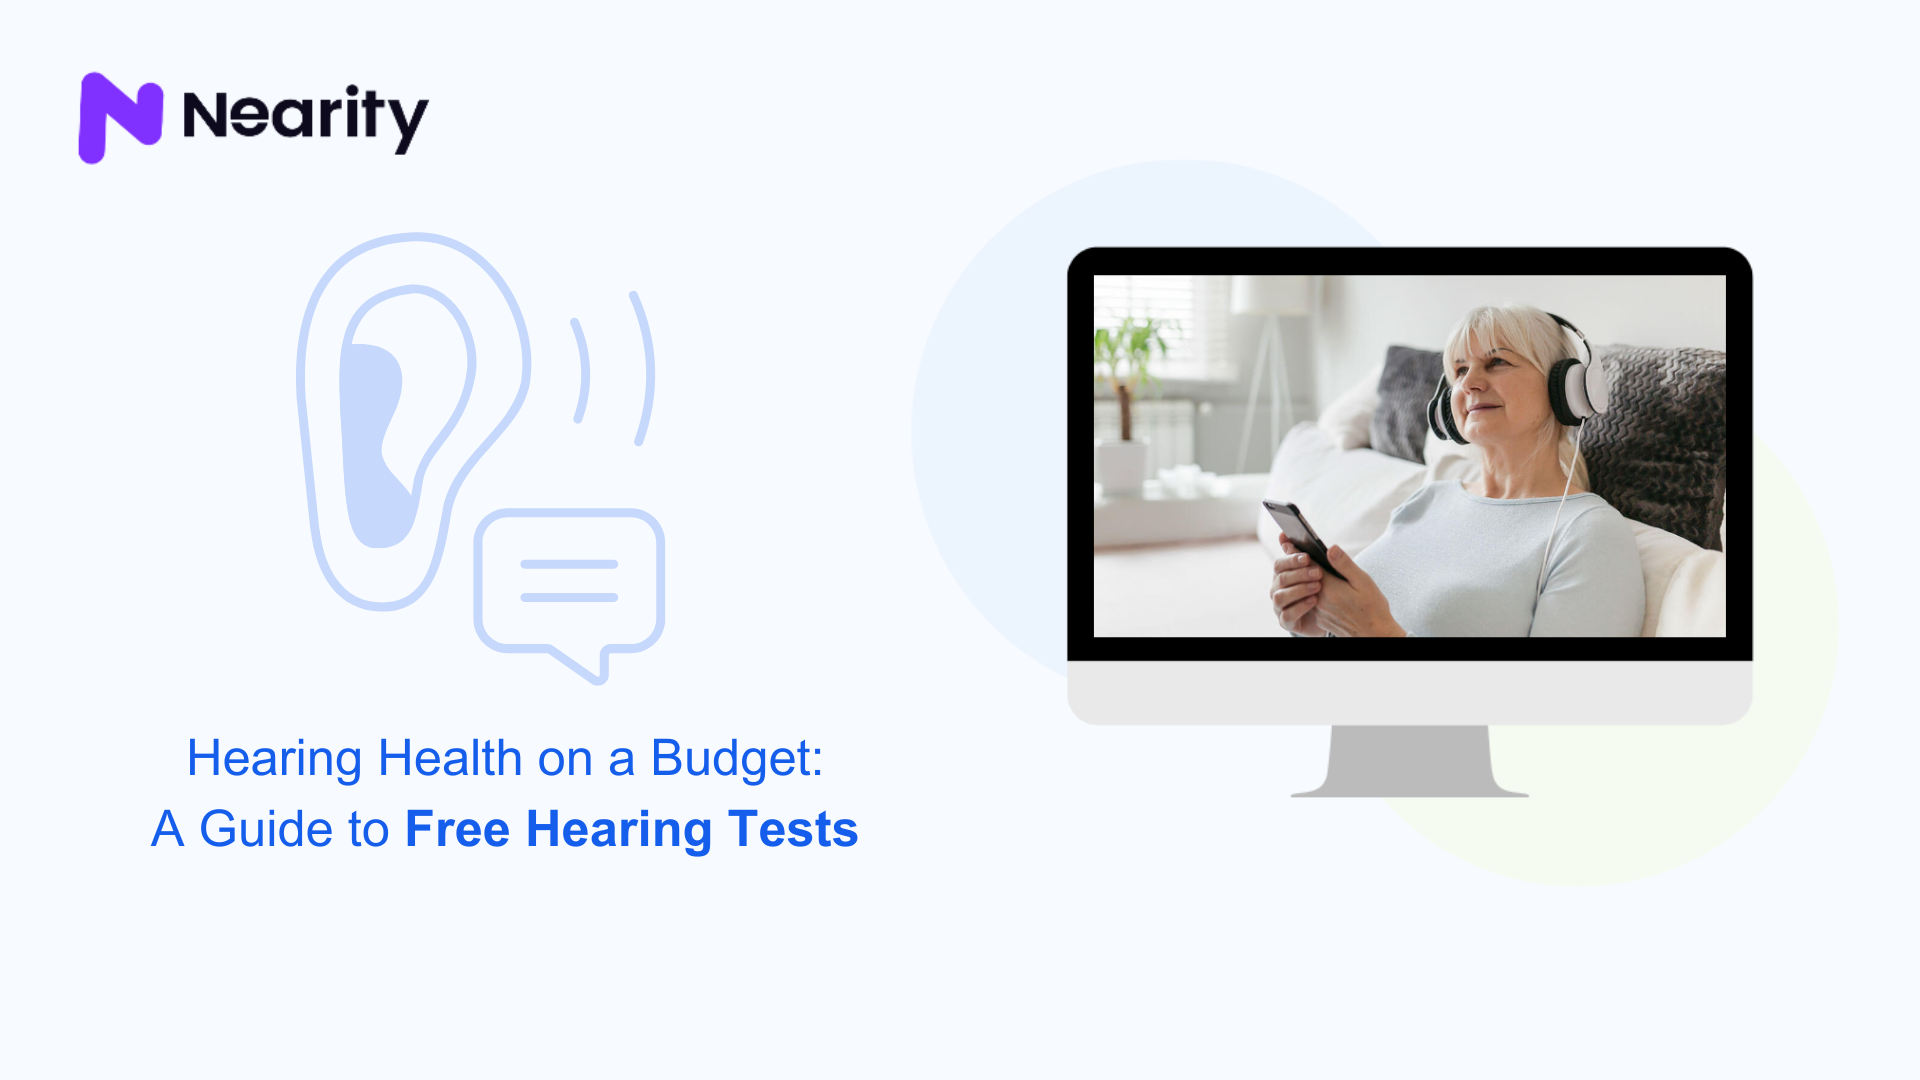 Hearing Health on a Budget: A Guide to Free Hearing Tests